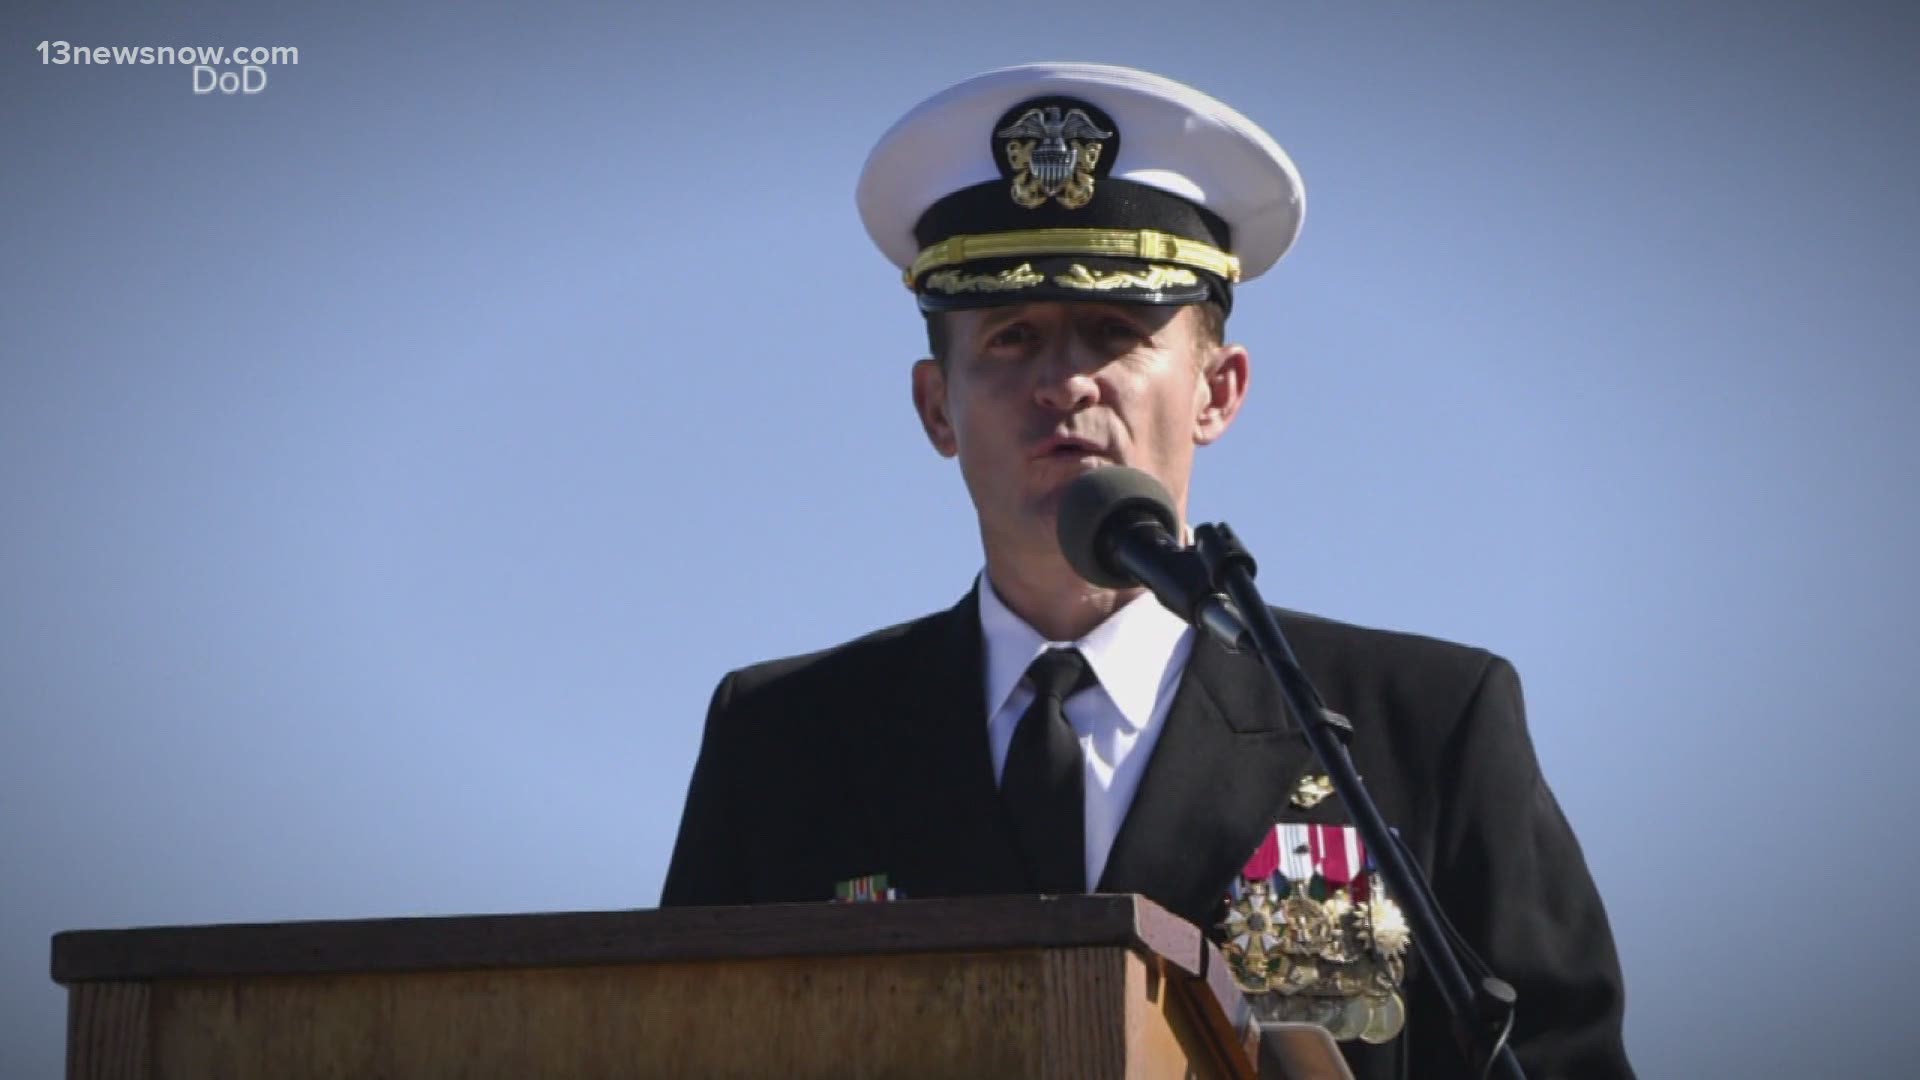 The Navy's top brass has decided not to reinstate former USS Theodore Roosevelt Captain Brett Crozier.